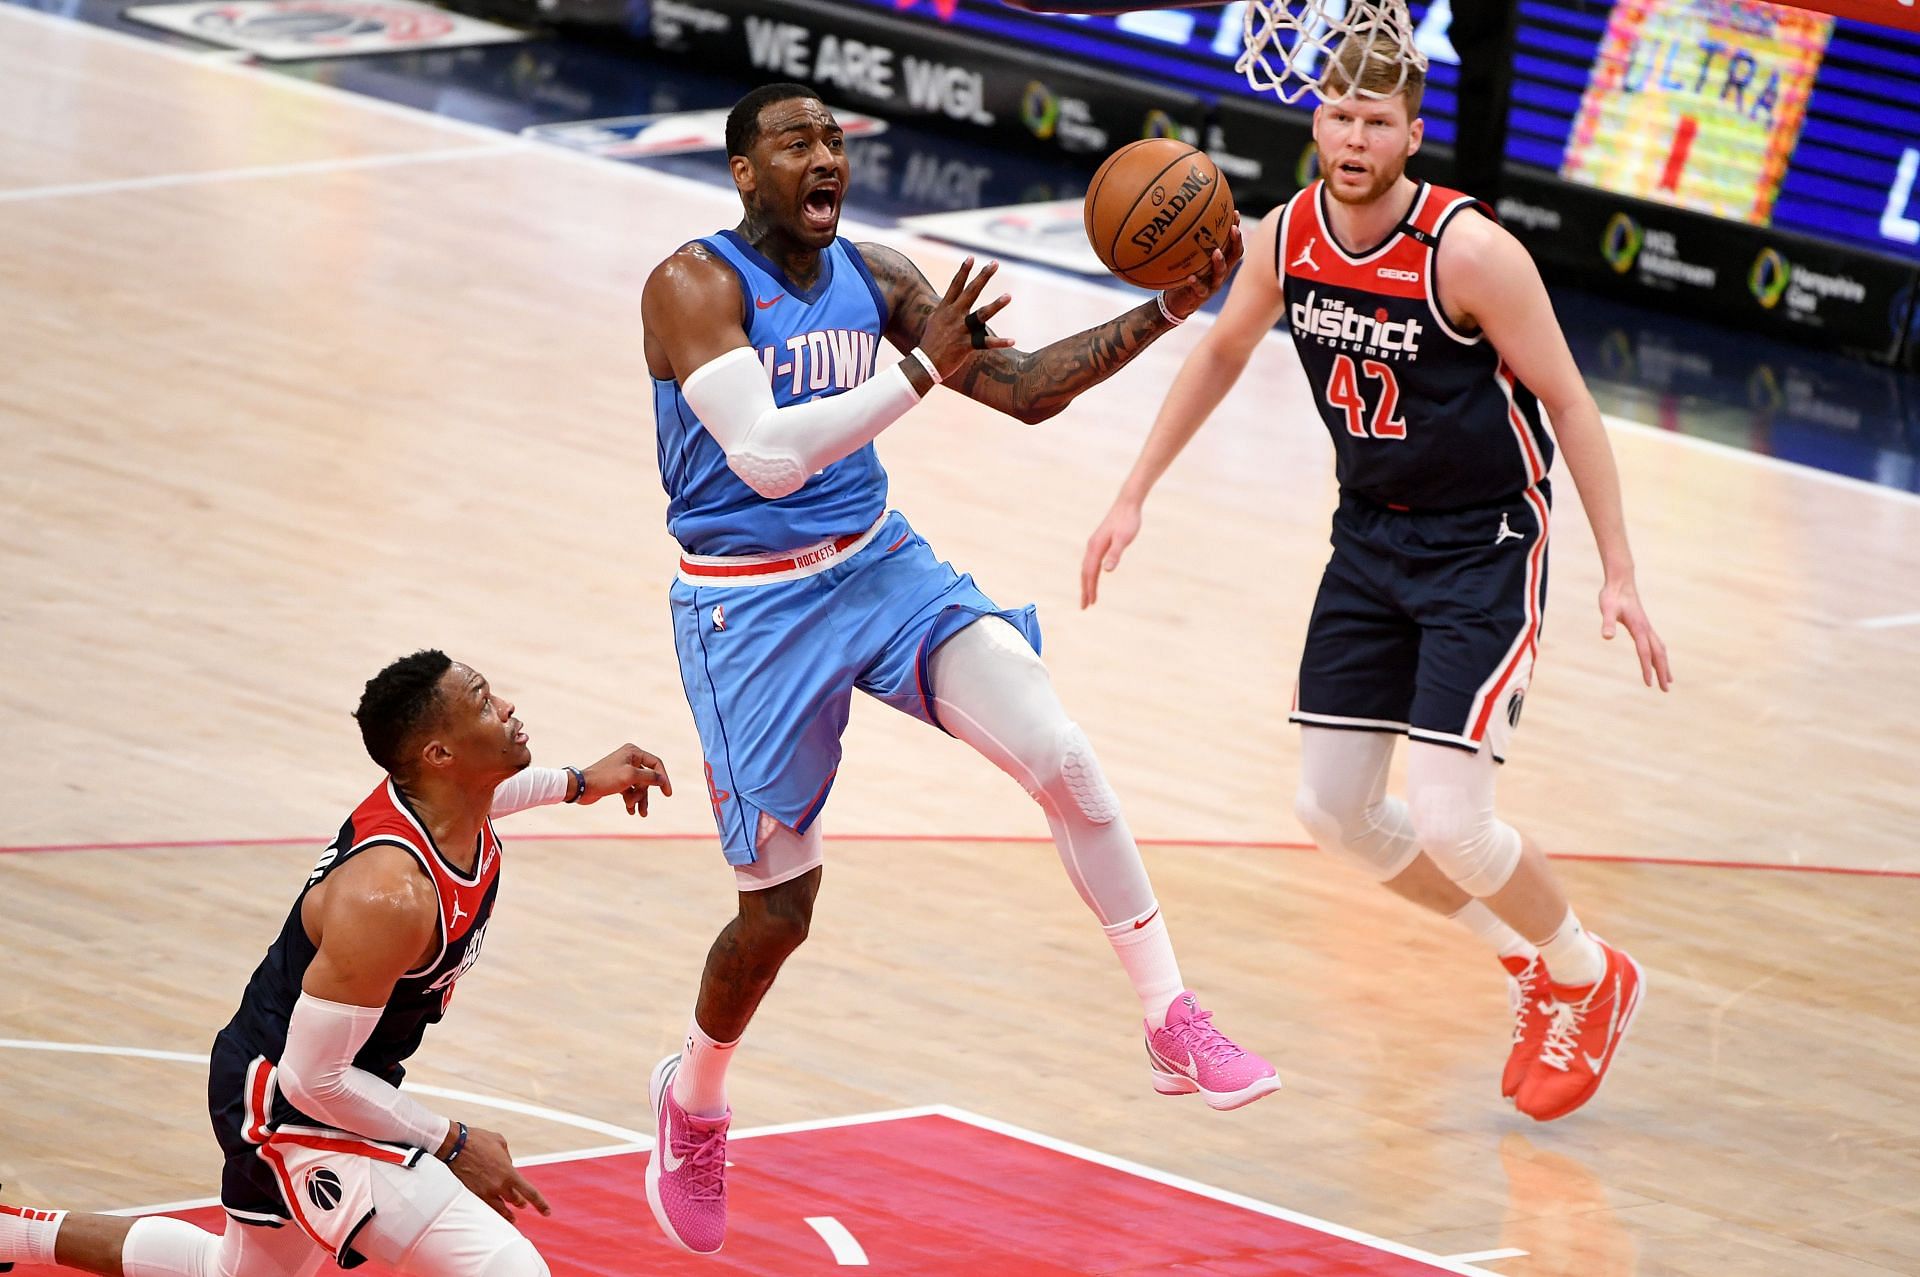 John Wall goes up for a layup against Russell Westbrook.